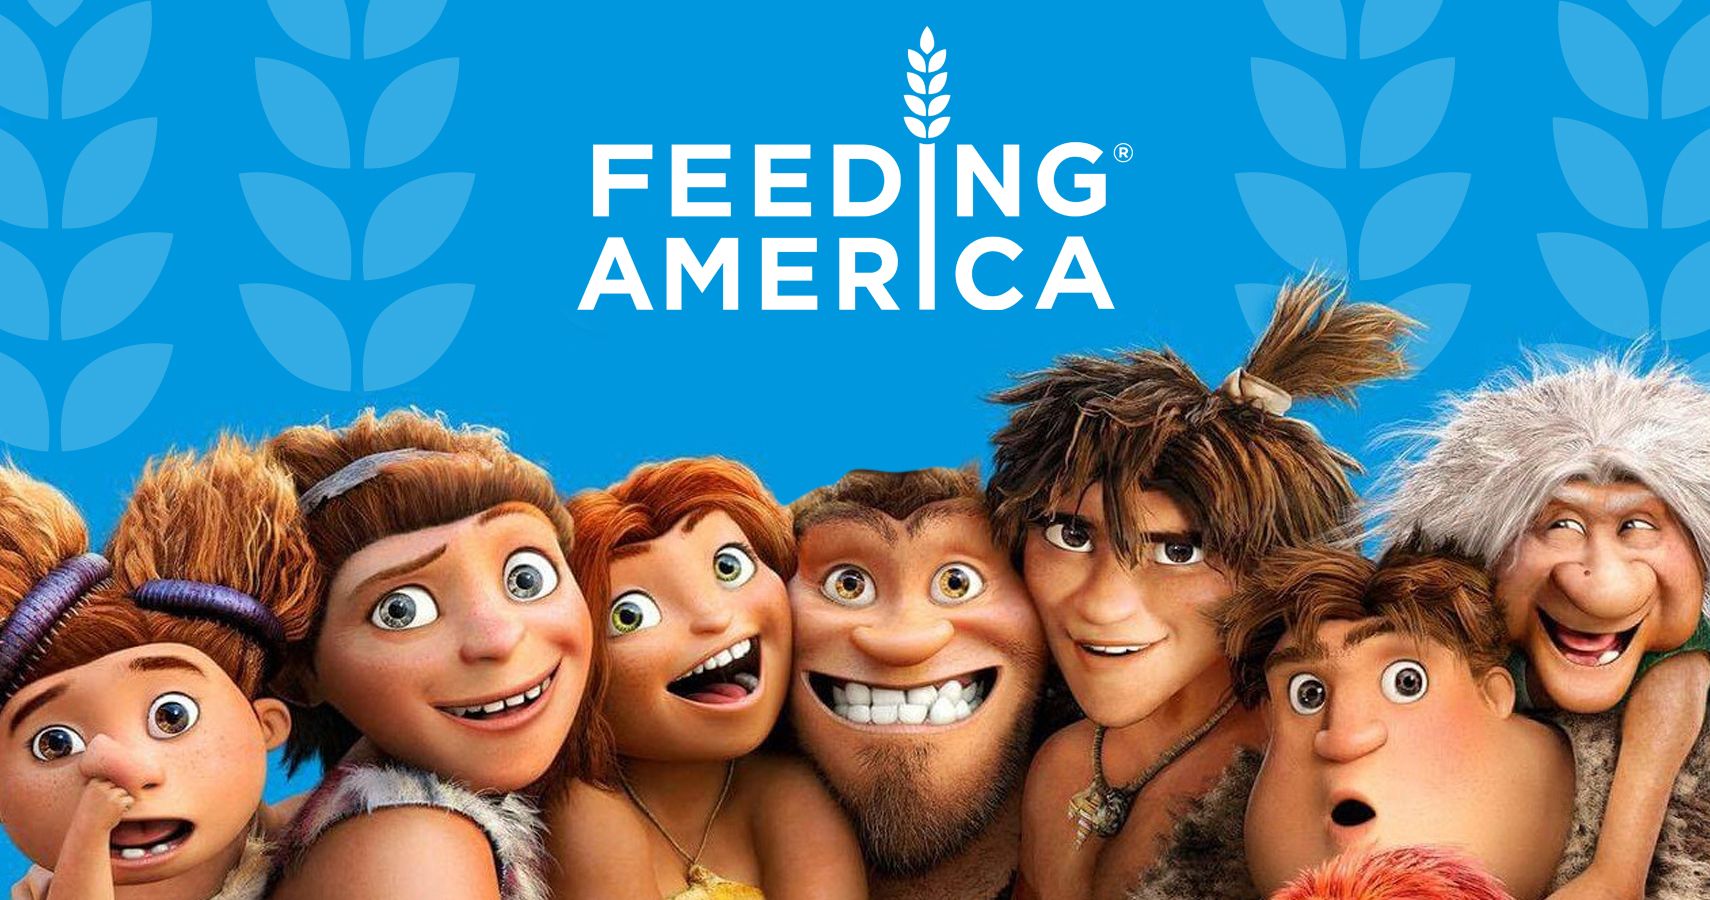 ‘The Croods: A New Age’ Partners With Feeding America To Help Families This Holiday Season